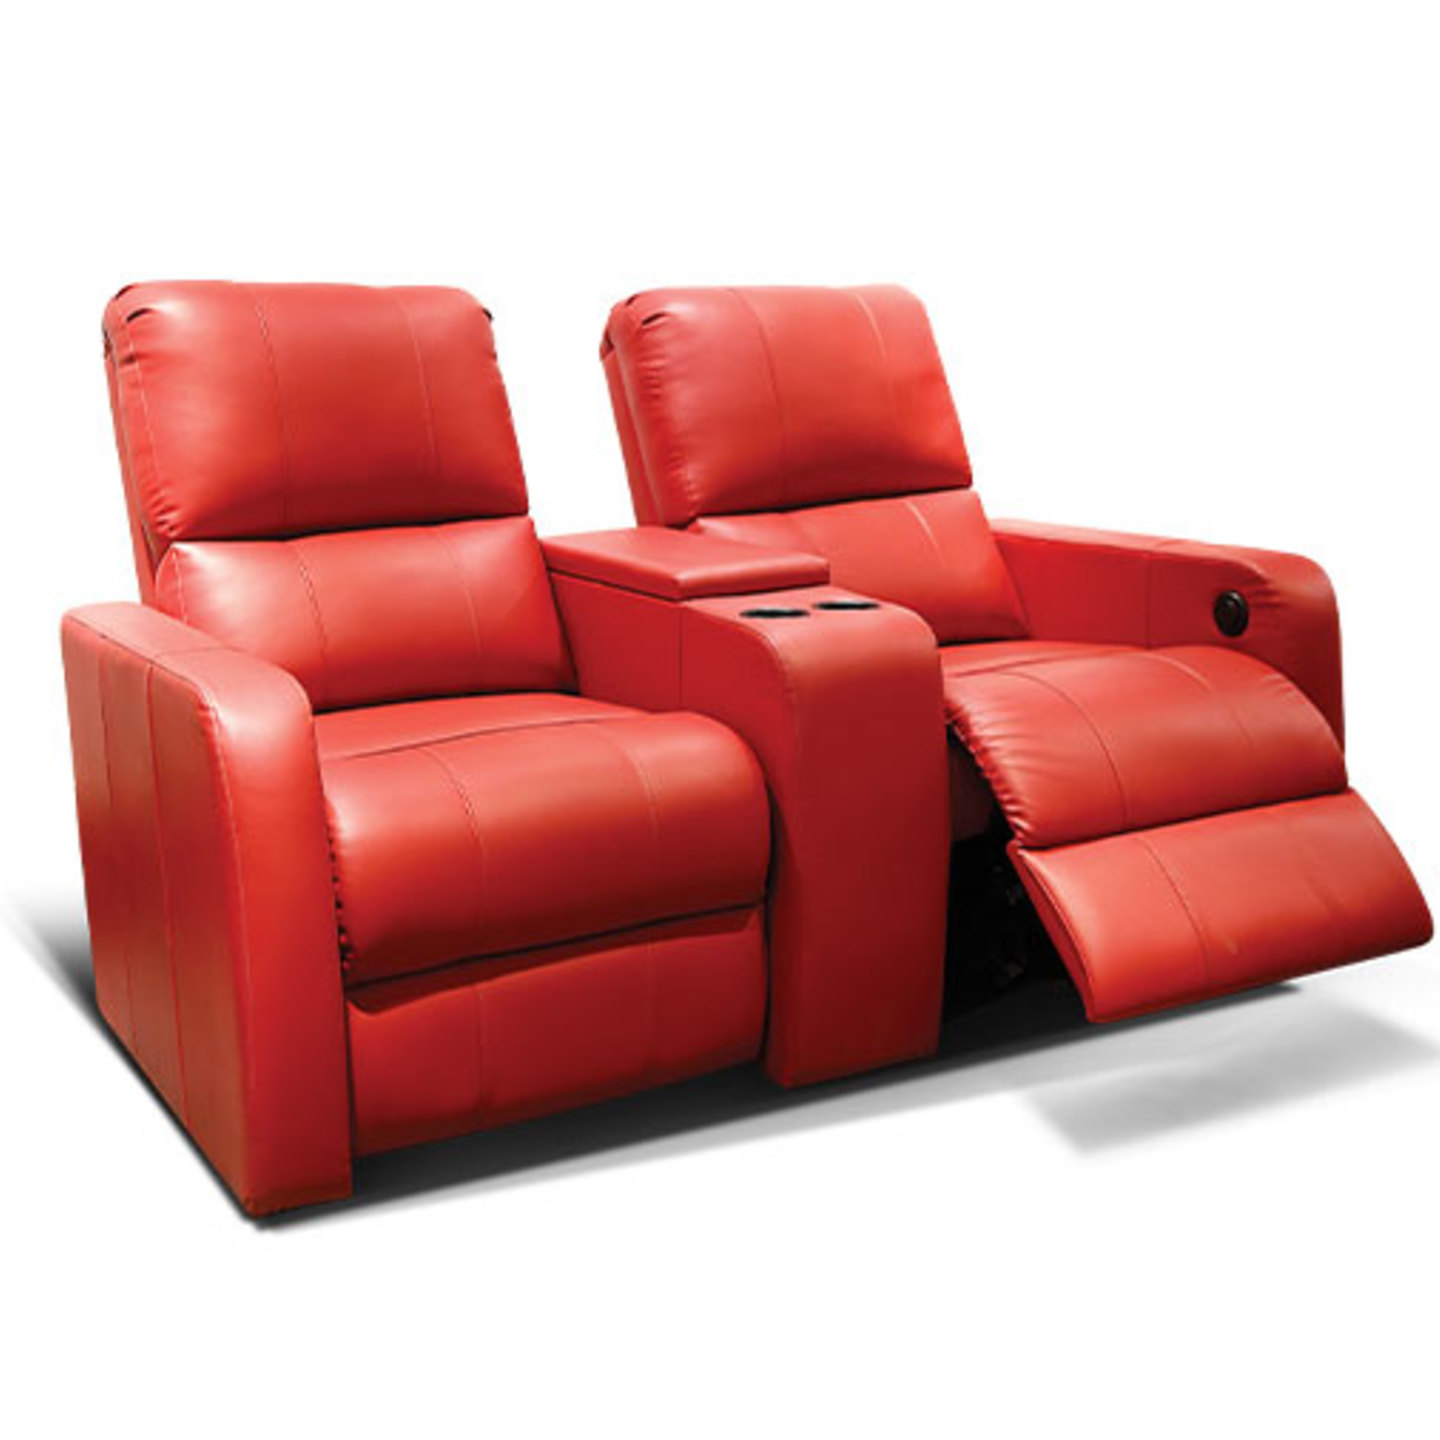 LN Recliner Chair Moderni Electronic System In Red Colour